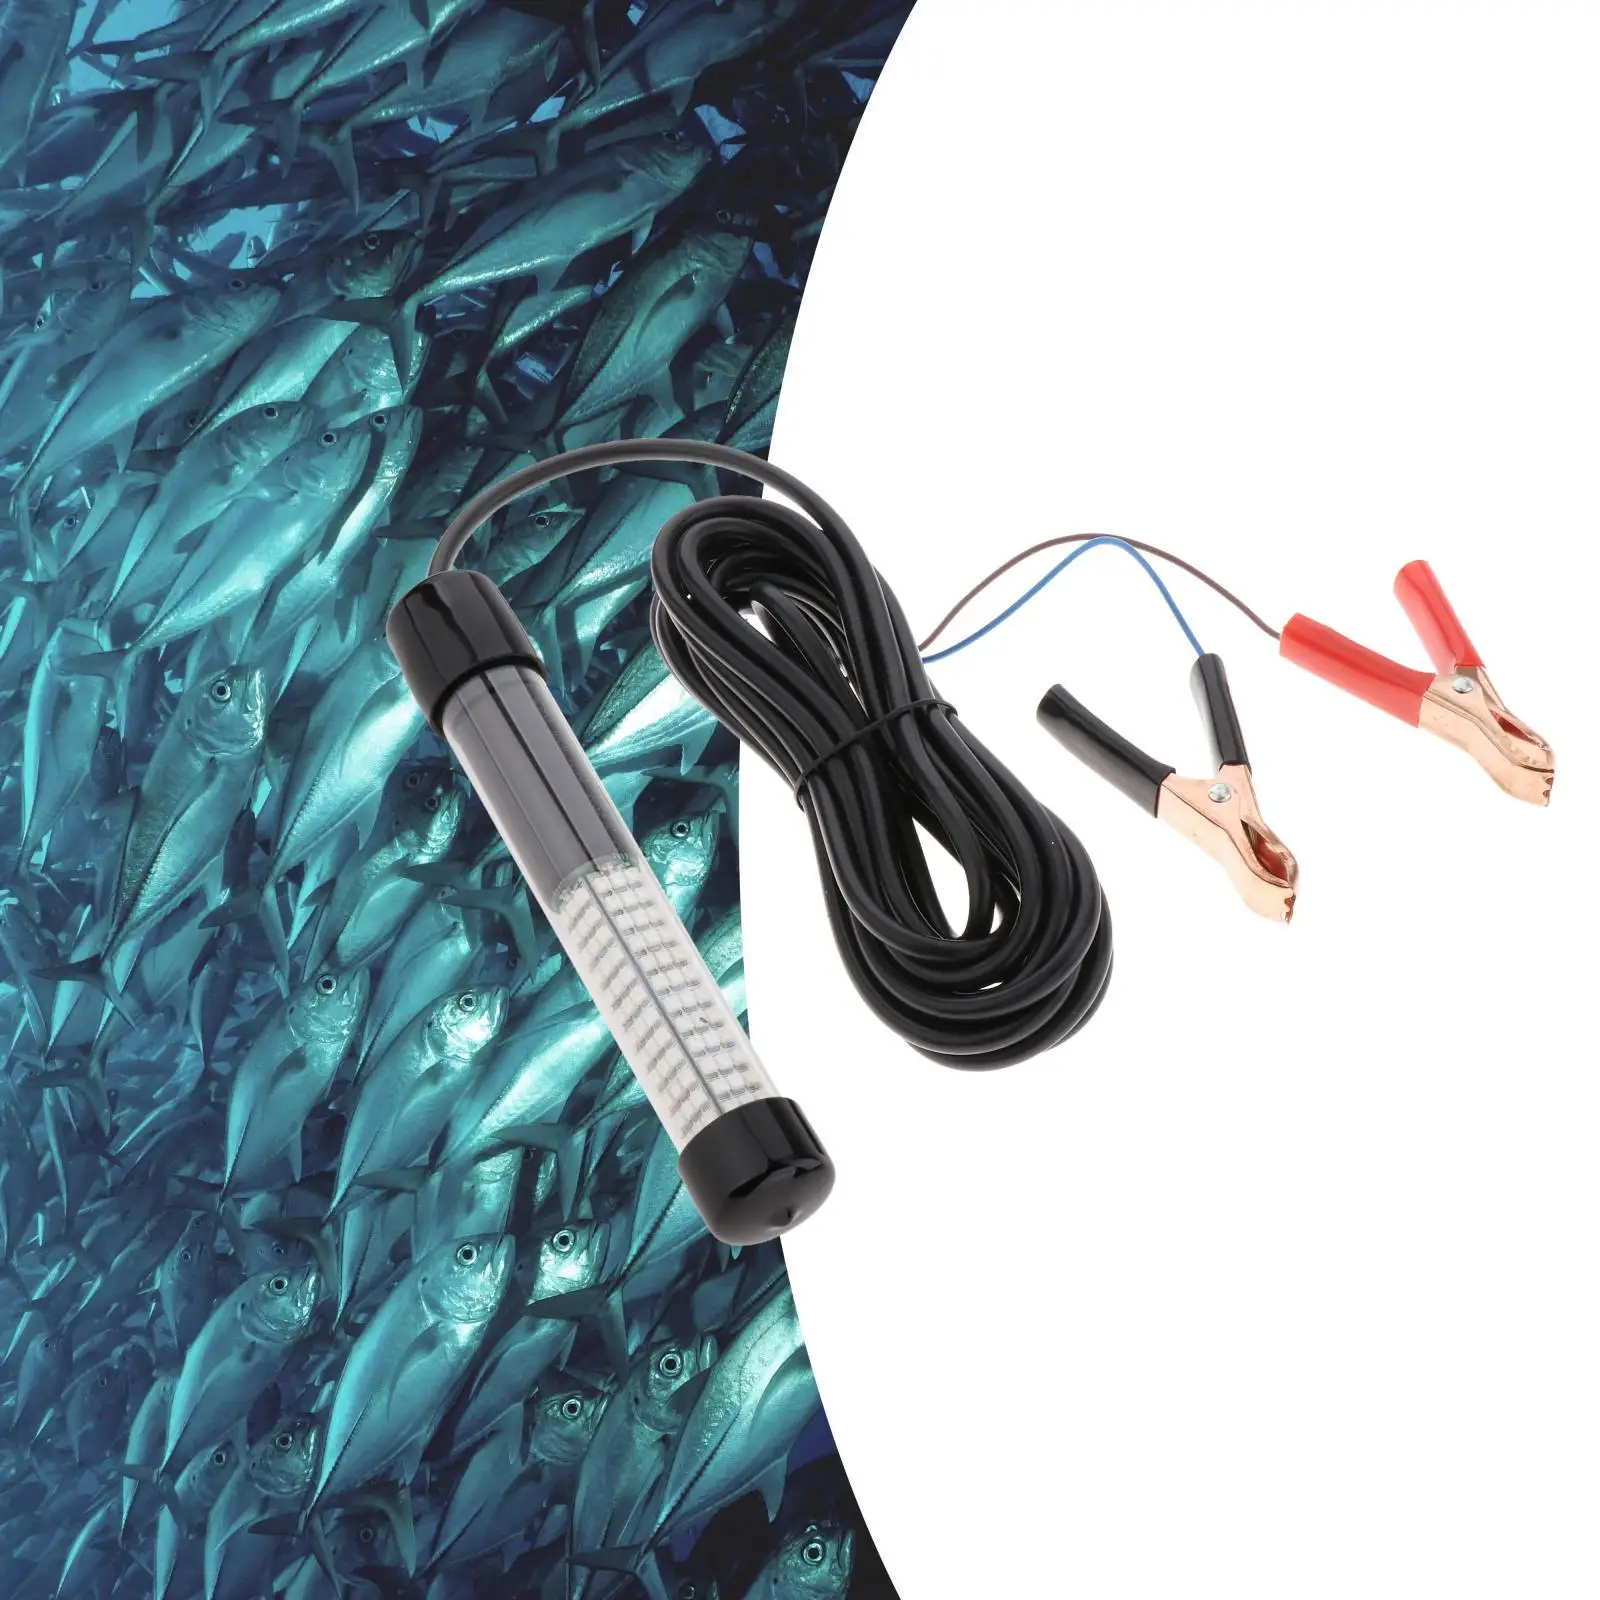 LED Submersible Fishing Light 5M Cable 12V Outdoor 20W Fishes Finder Lamp Underwater Fishing Light for Saltwater Sea Fishing